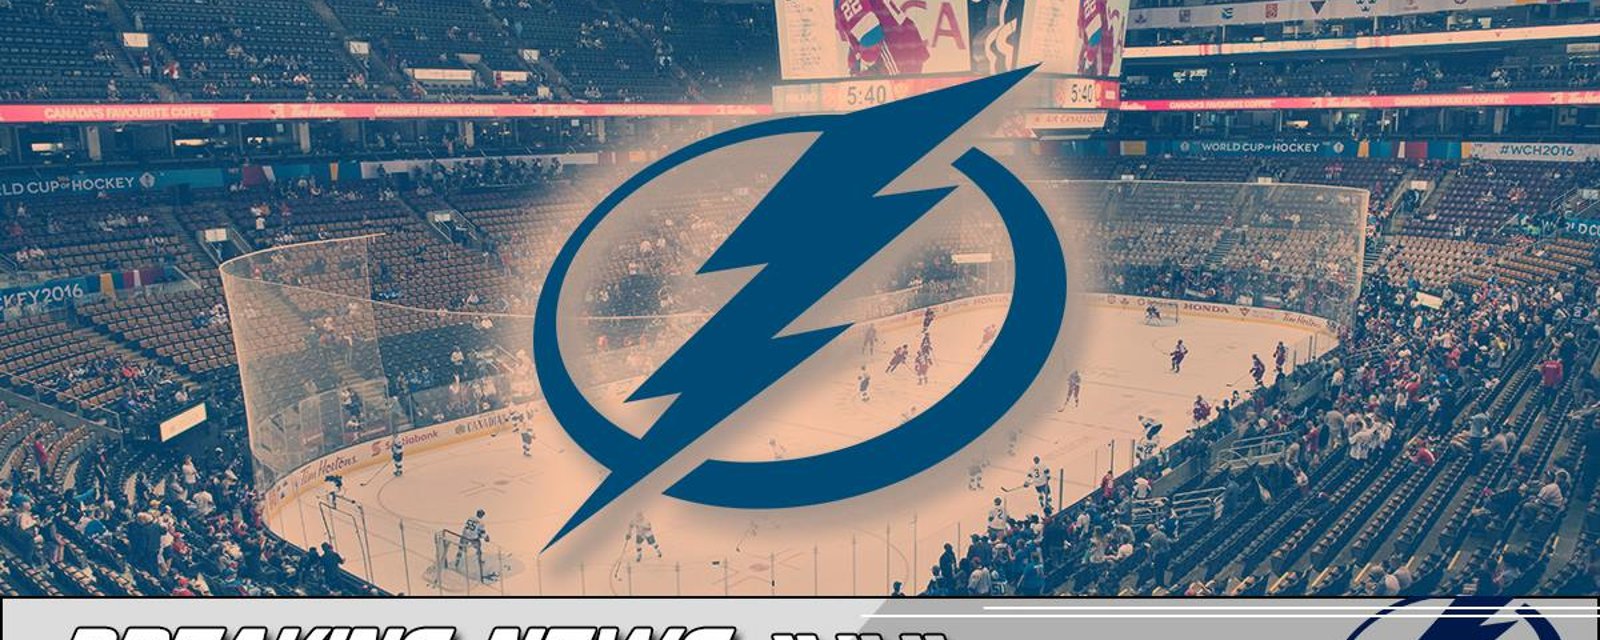 Breaking News: The Bolts have signed 6ft2, 202 pounds defenseman.